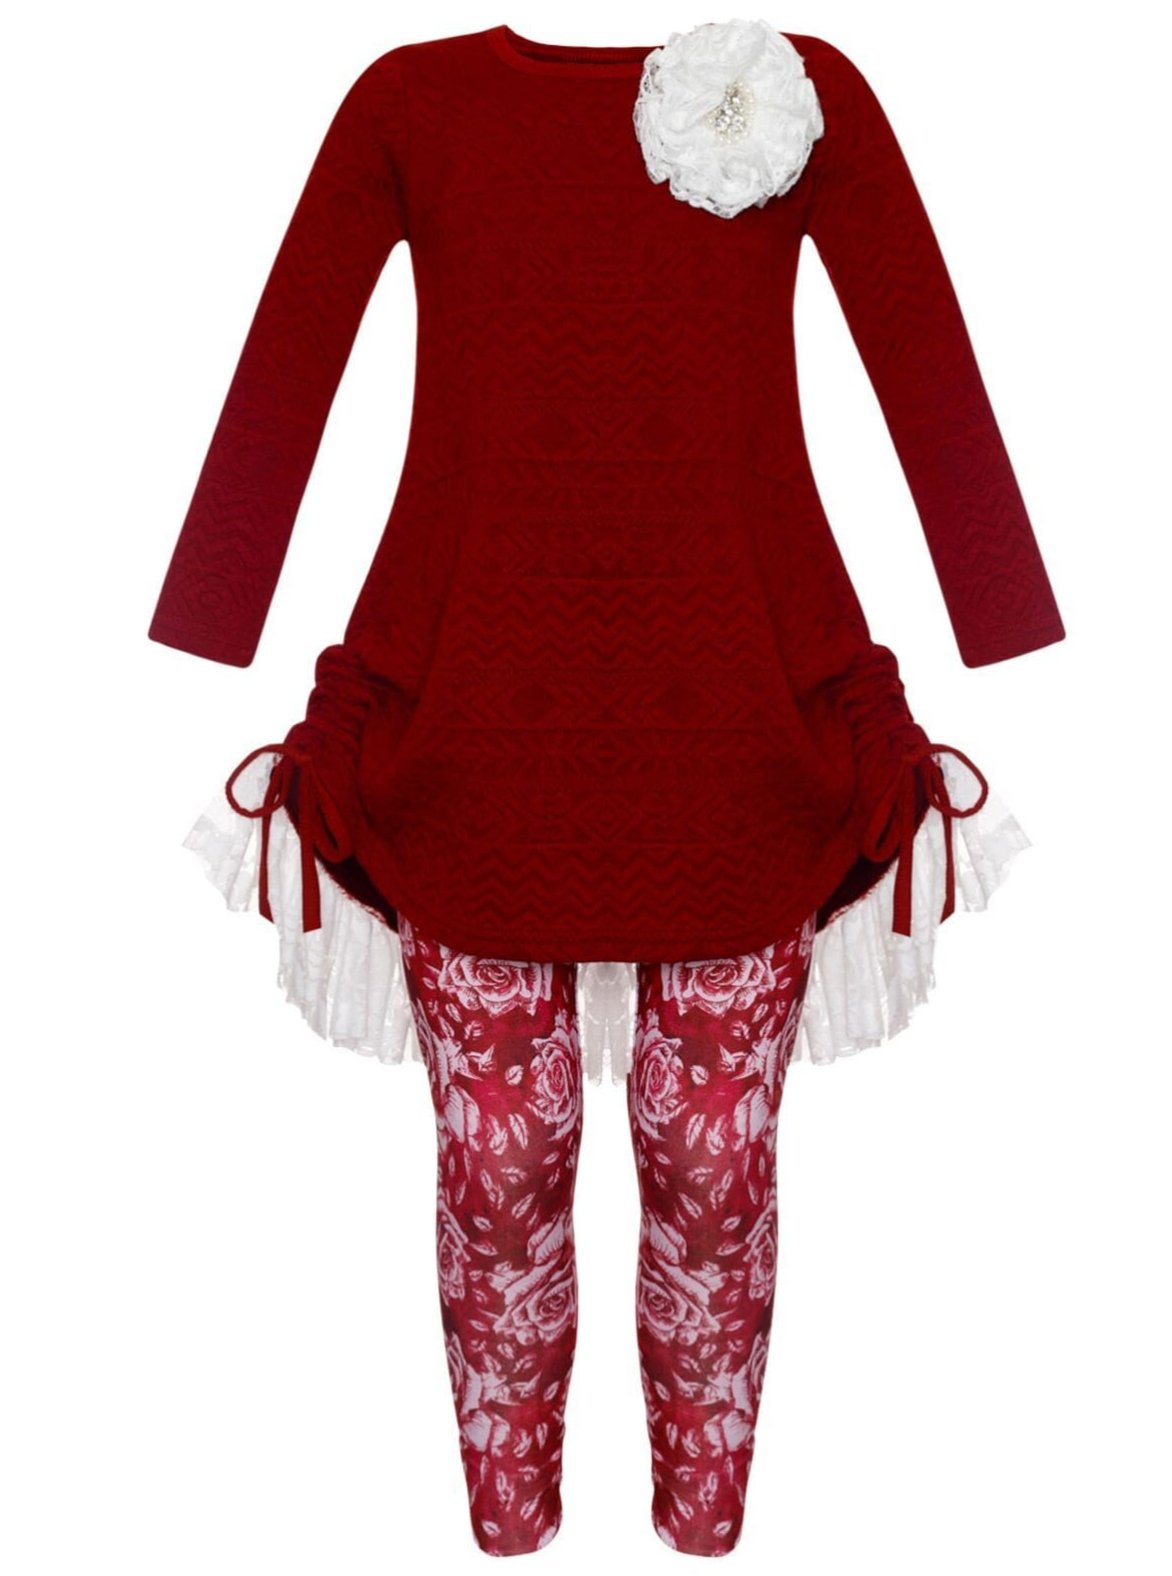 Girls Cable Knit Long Sleeve Hi-Lo Drawstring Lace Tunic & Floral Leggings Set - Burgundy / 2T/3T - Girls Fall Casual Set